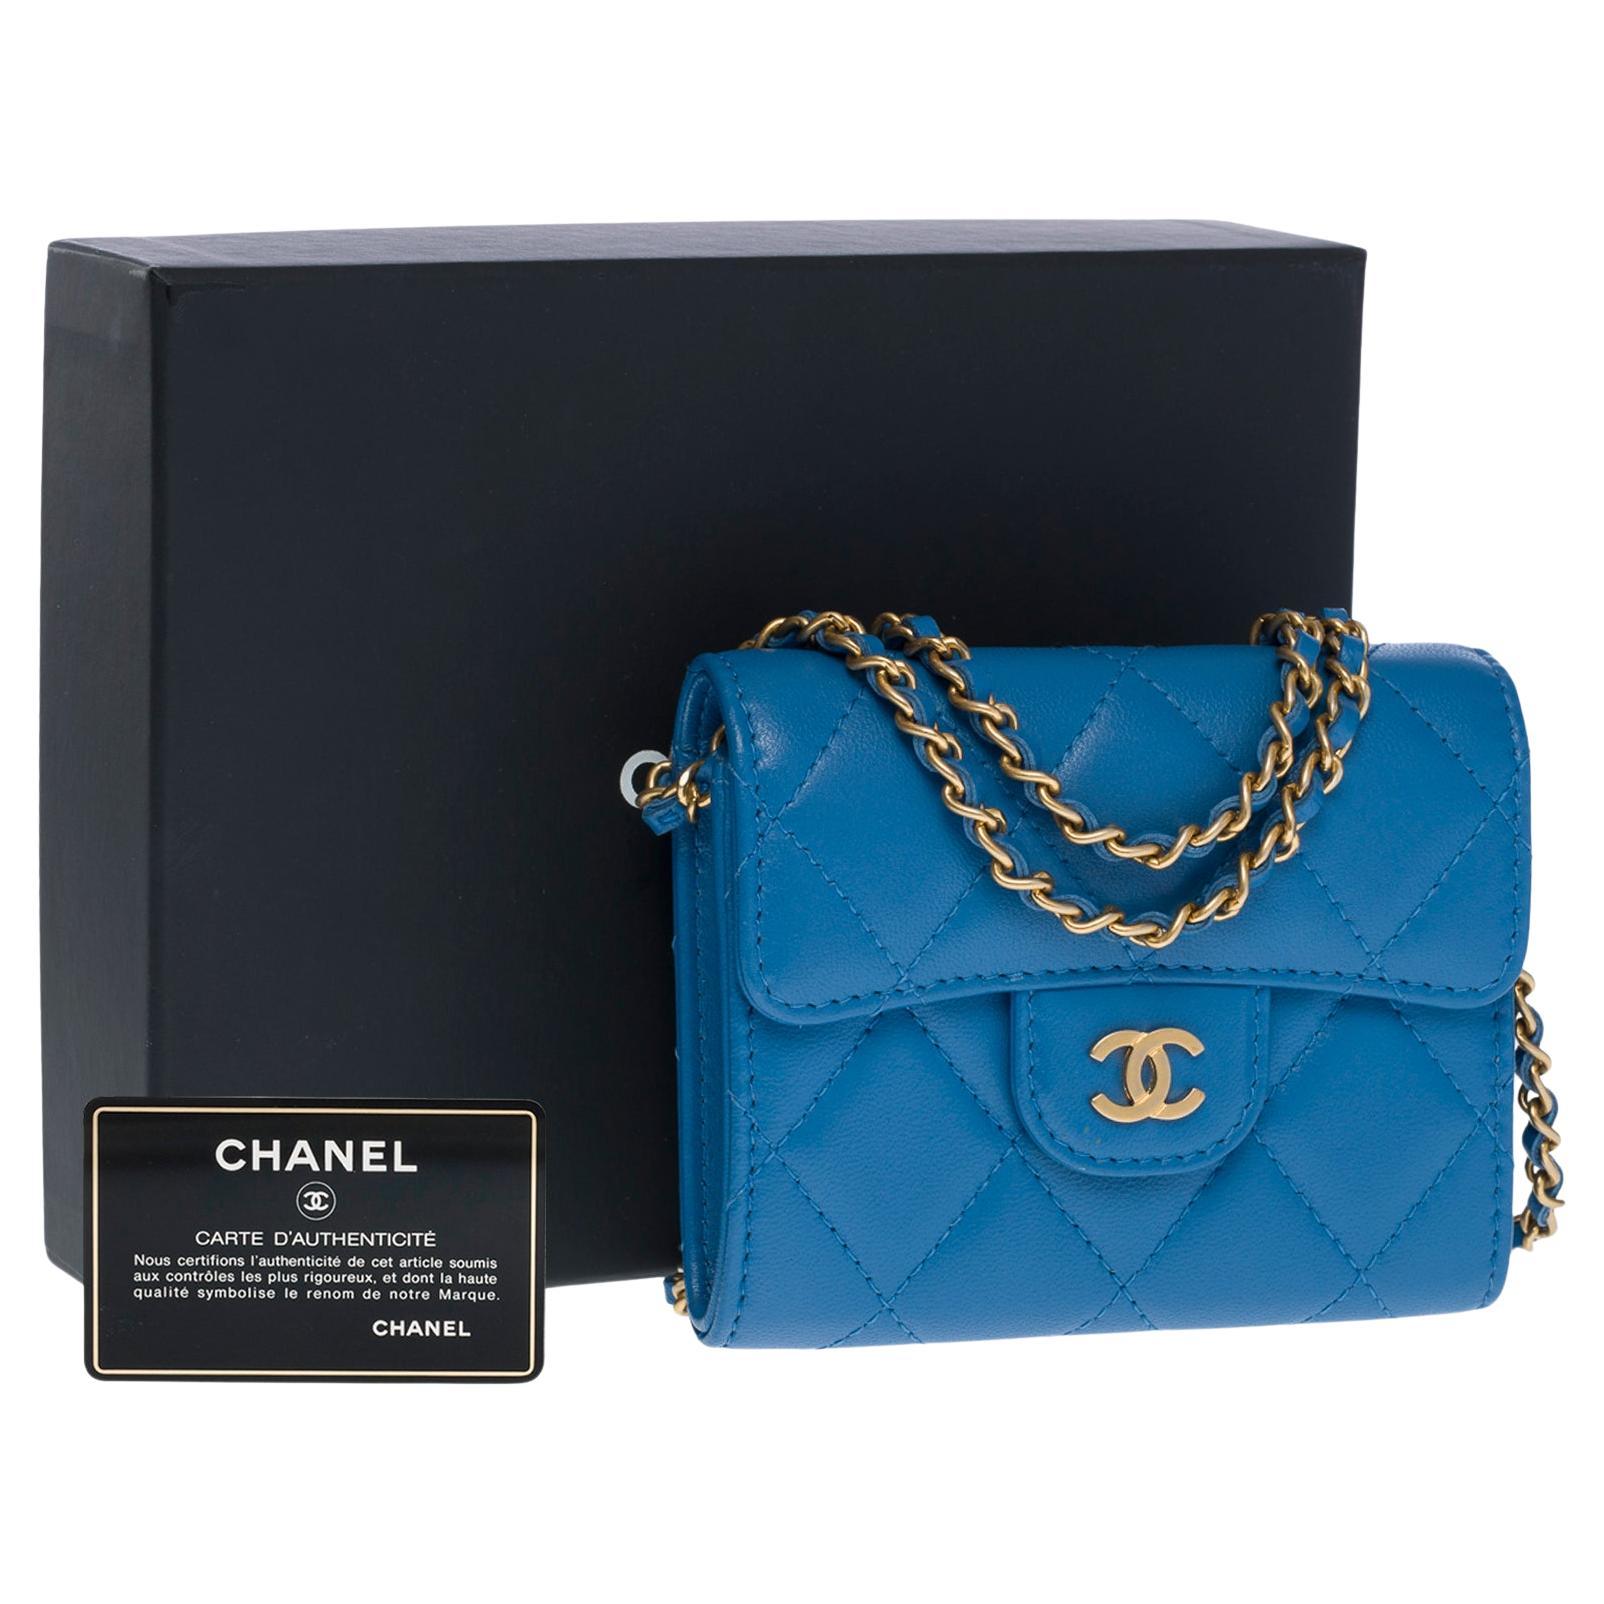 New Chanel Mini Wallet on Chain (WOC)  shoulder bag in blue quilted leather, GHW